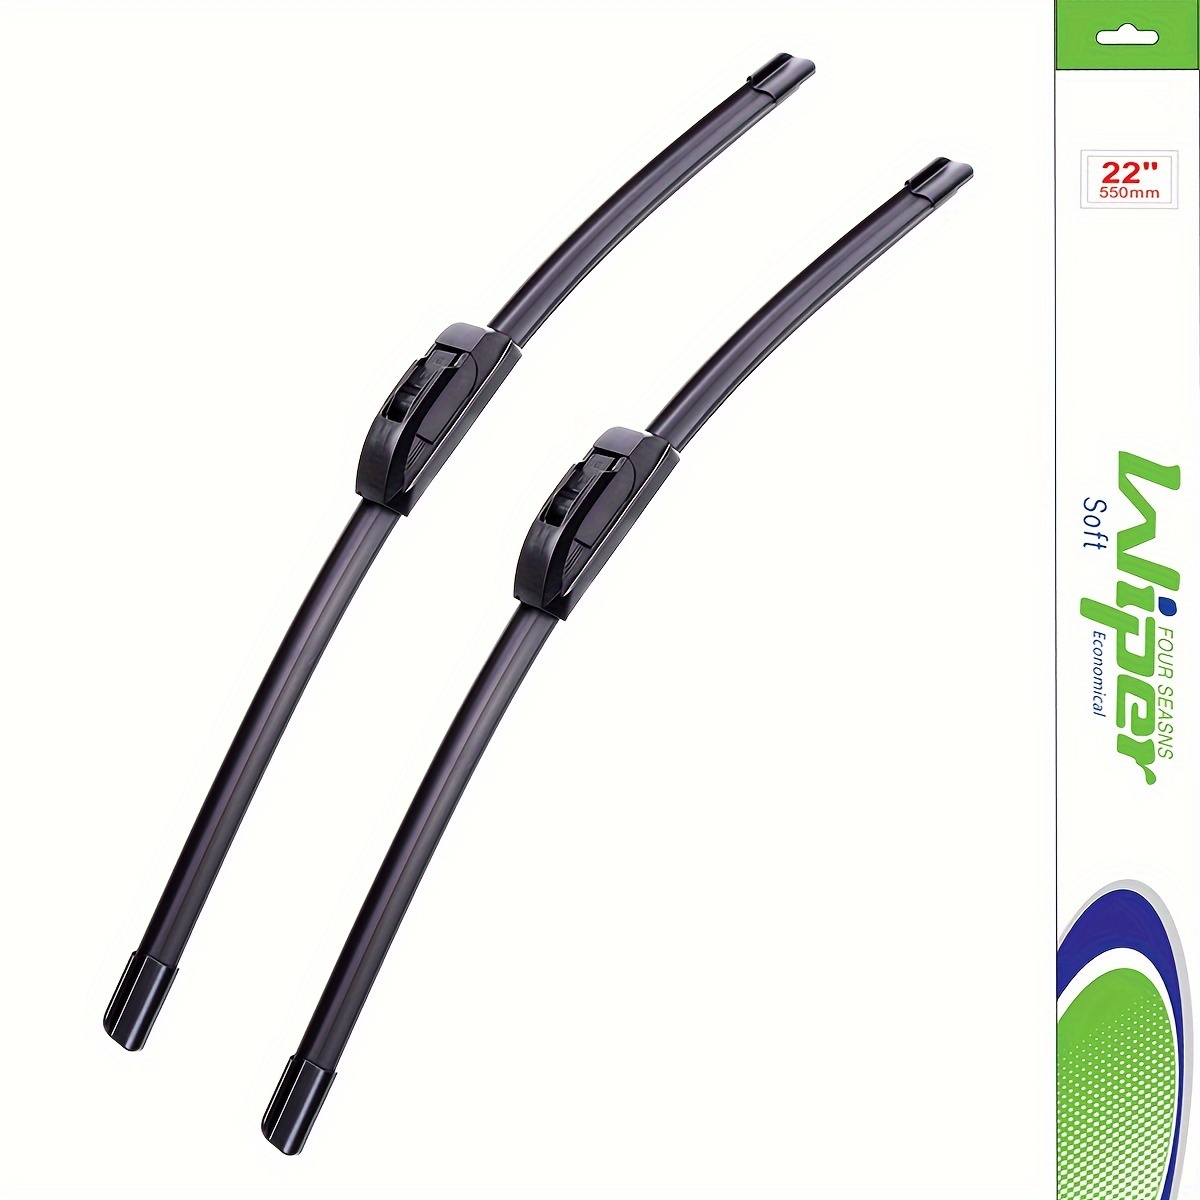 

2-in-1 Water Repellent Wiper Blades, Various Inch Windshield Wipers, Automotive Replacement Windshield Wiper Blades With Patented Repellency Technology